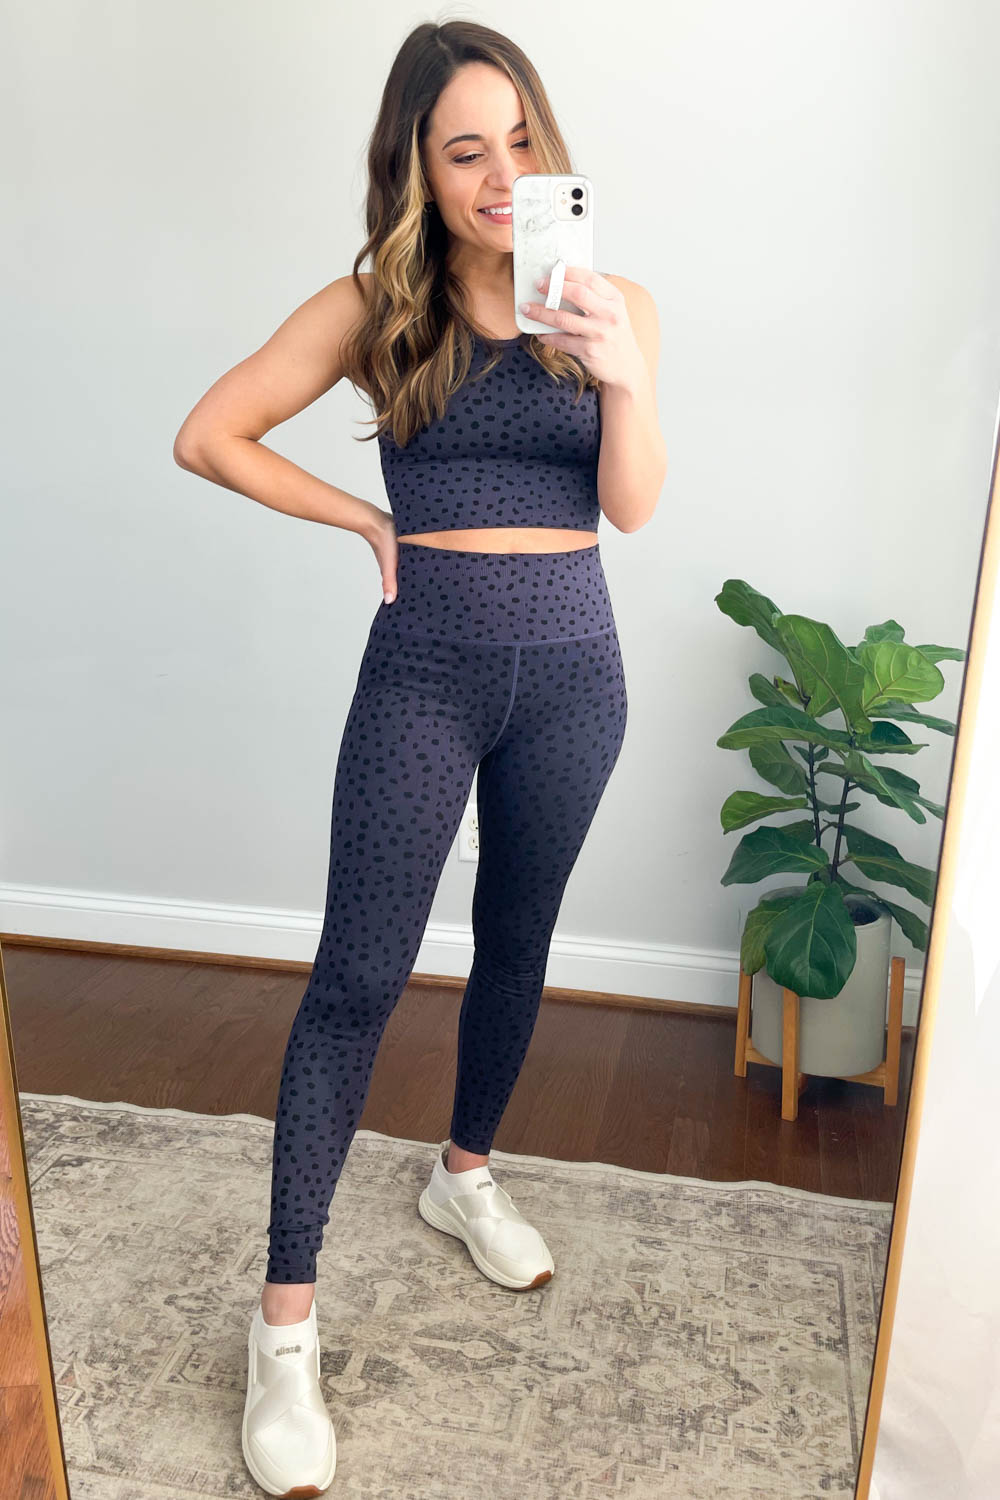 Zella elevate | petite activewear | workout outfits | petite style | Nordstrom activewear